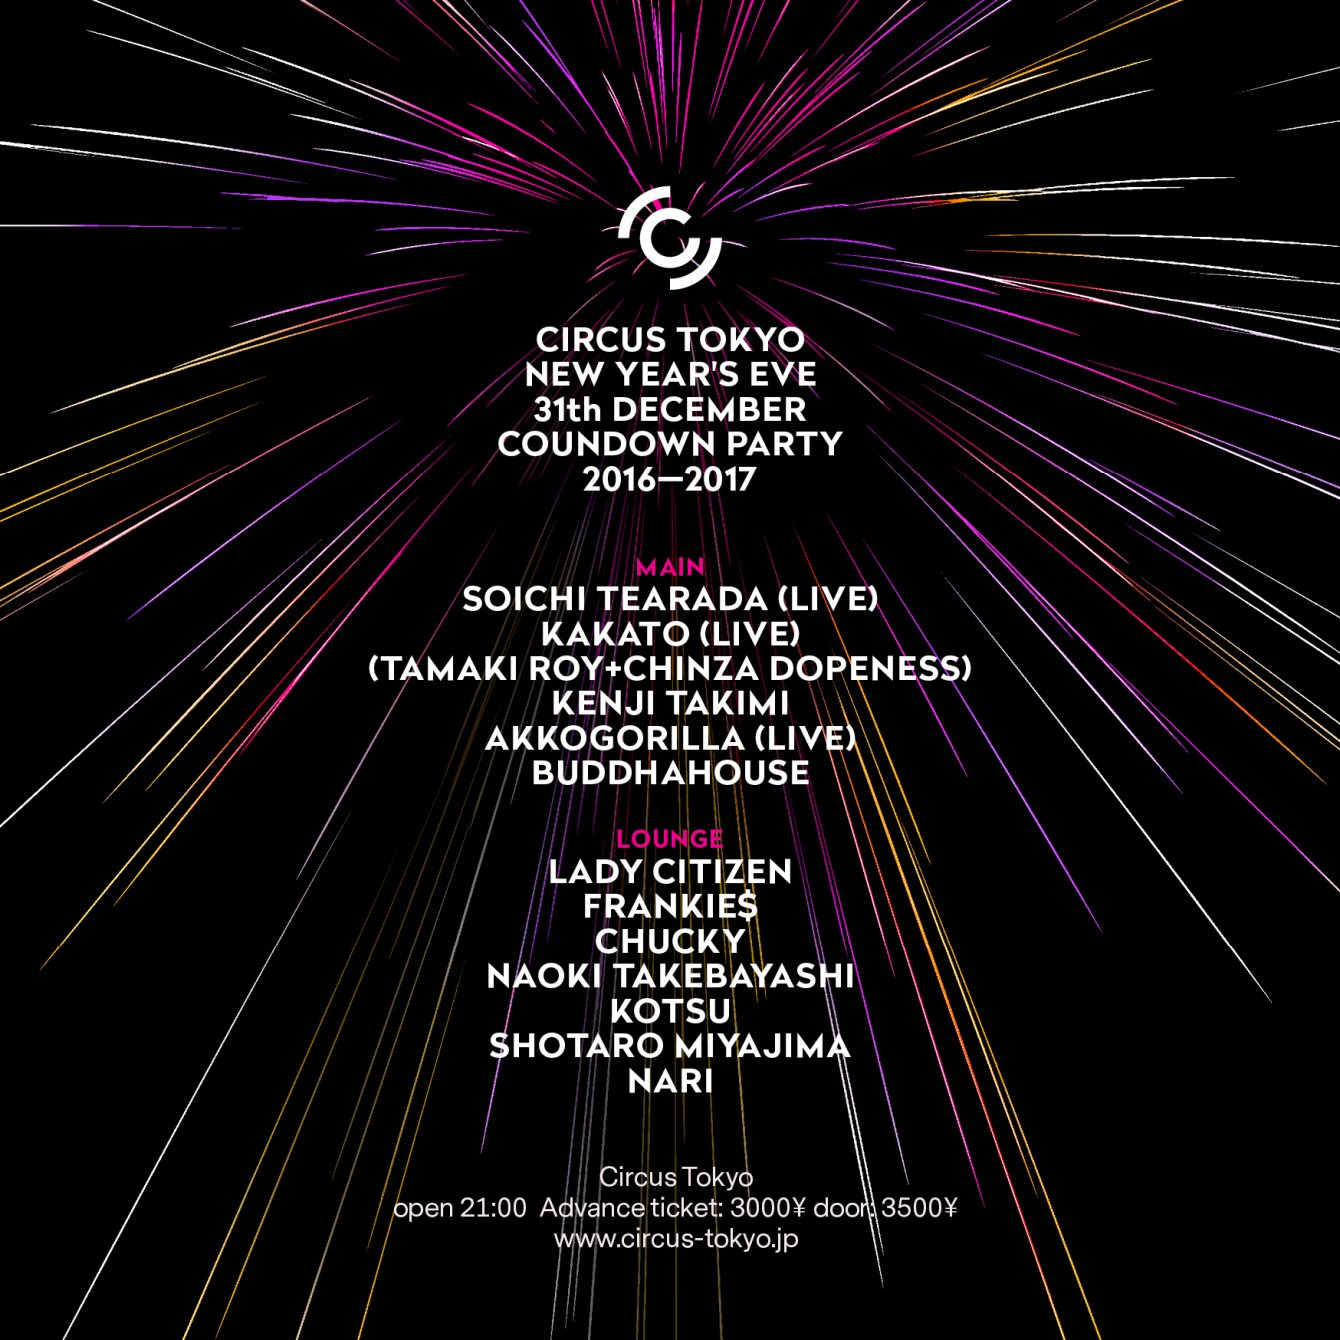 Circus Tokyo Countdown Party 2016 to 2017 - Flyer back